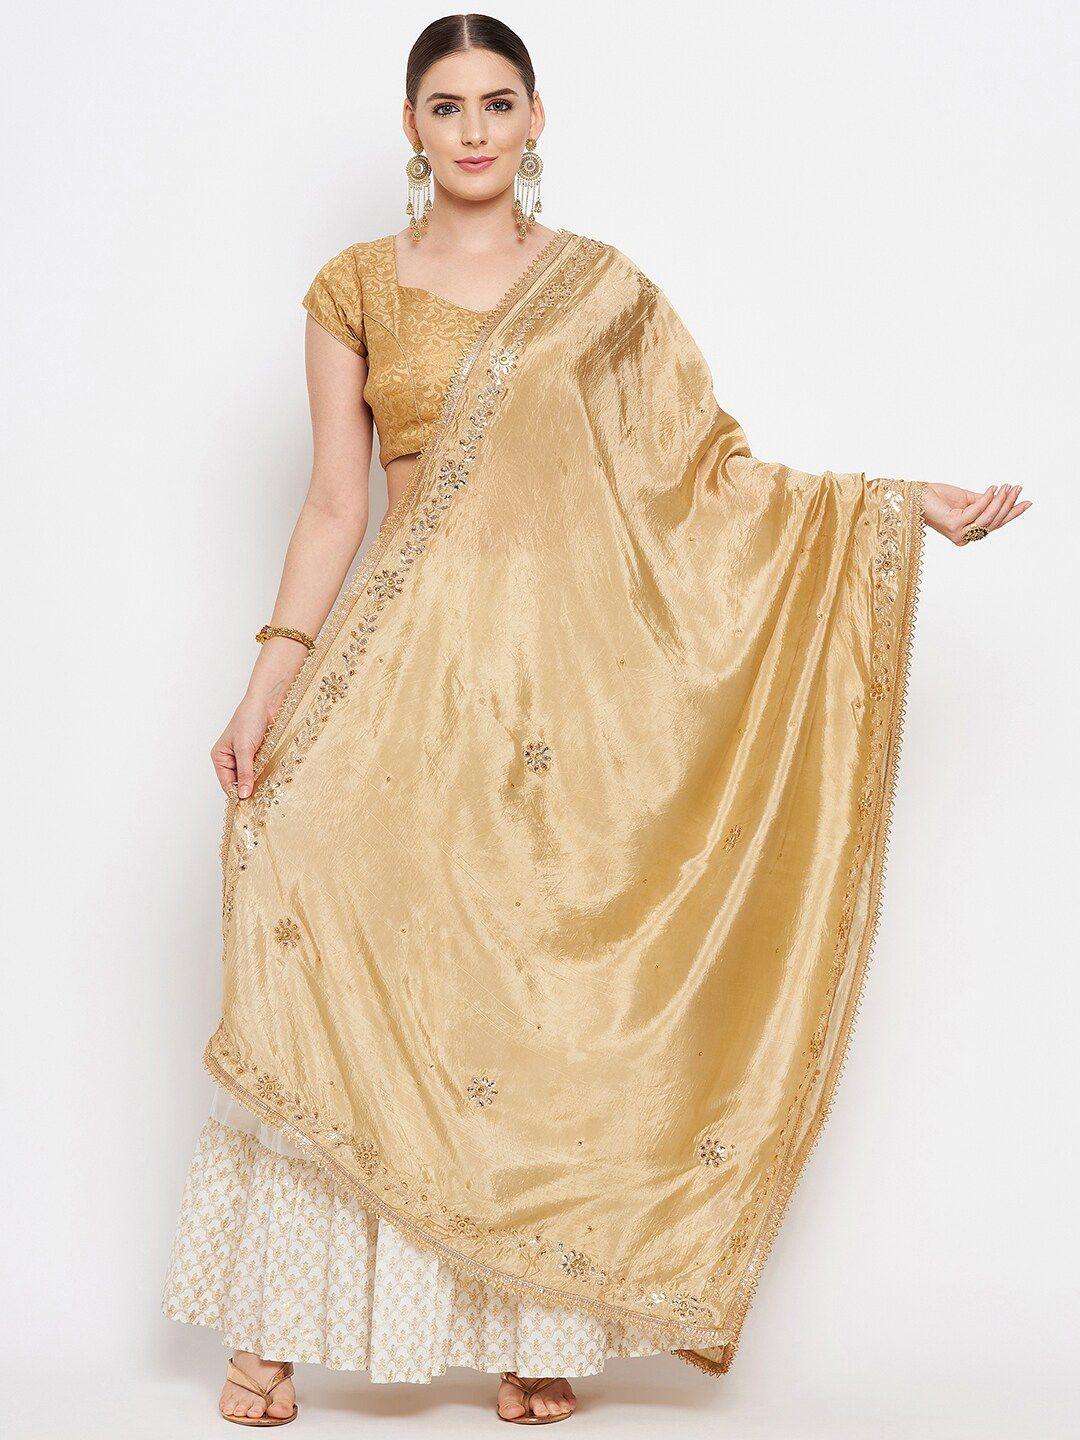 Clora Creation Beige & Gold-Toned Embroidered Dupatta with Beads and Stones